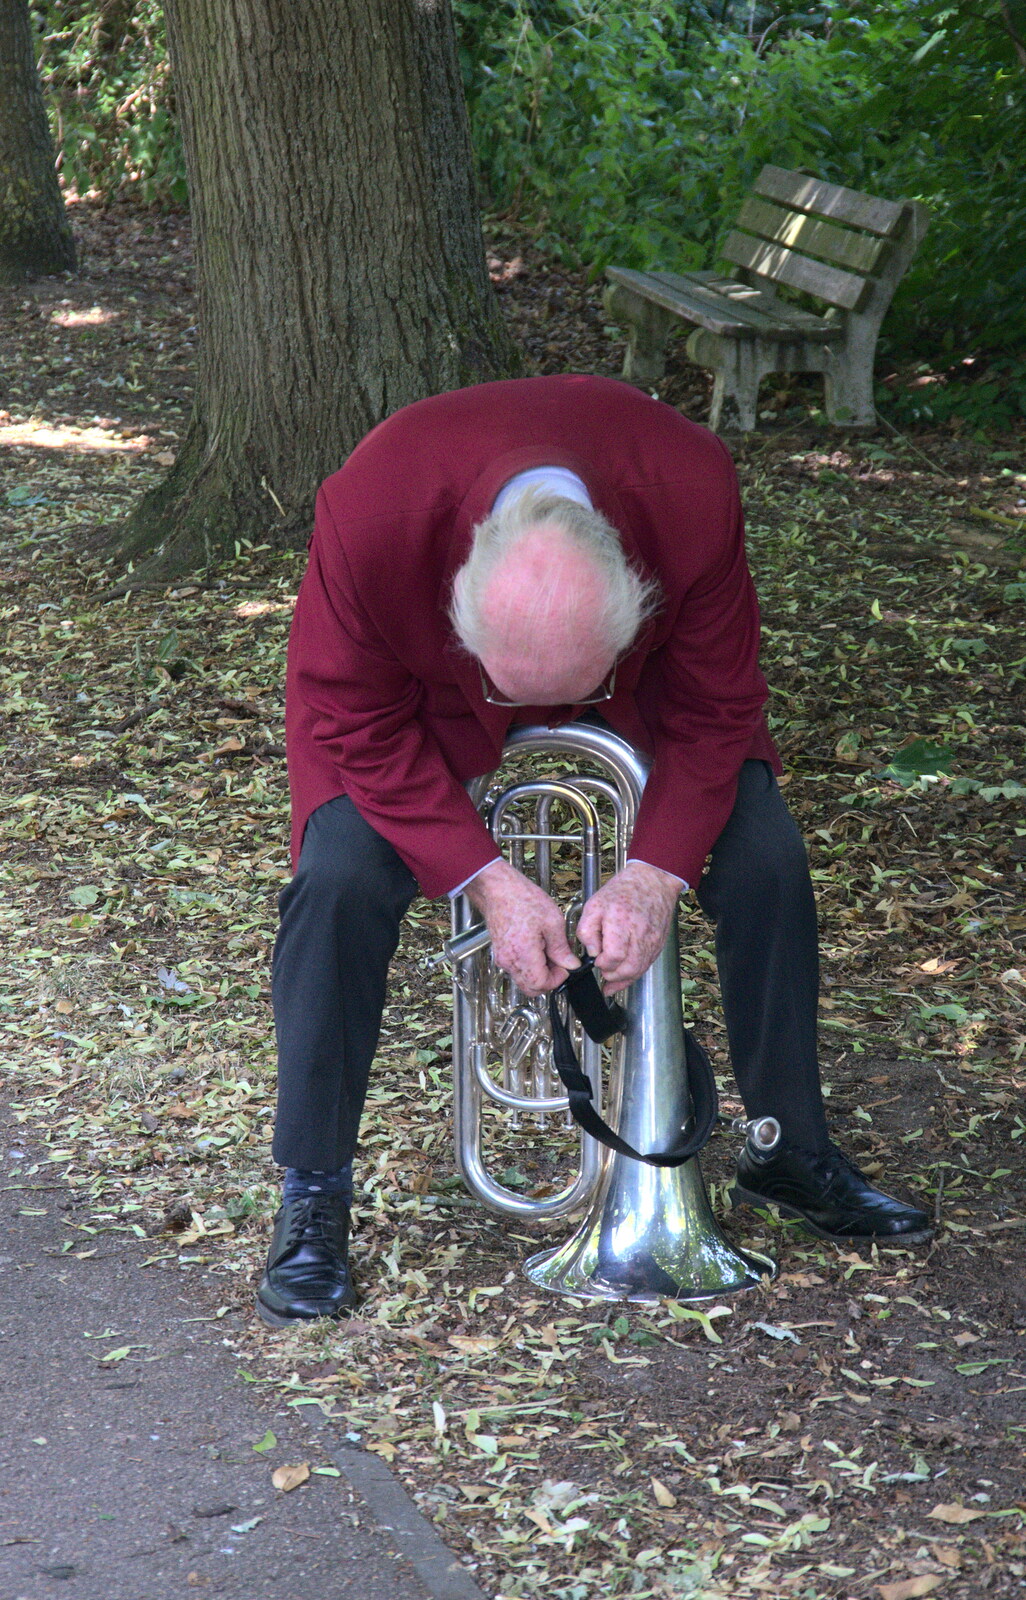 This dude looks like he's pooed a euphonium out from The Mayor Making Parade, Eye, Suffolk - 24th June 2018